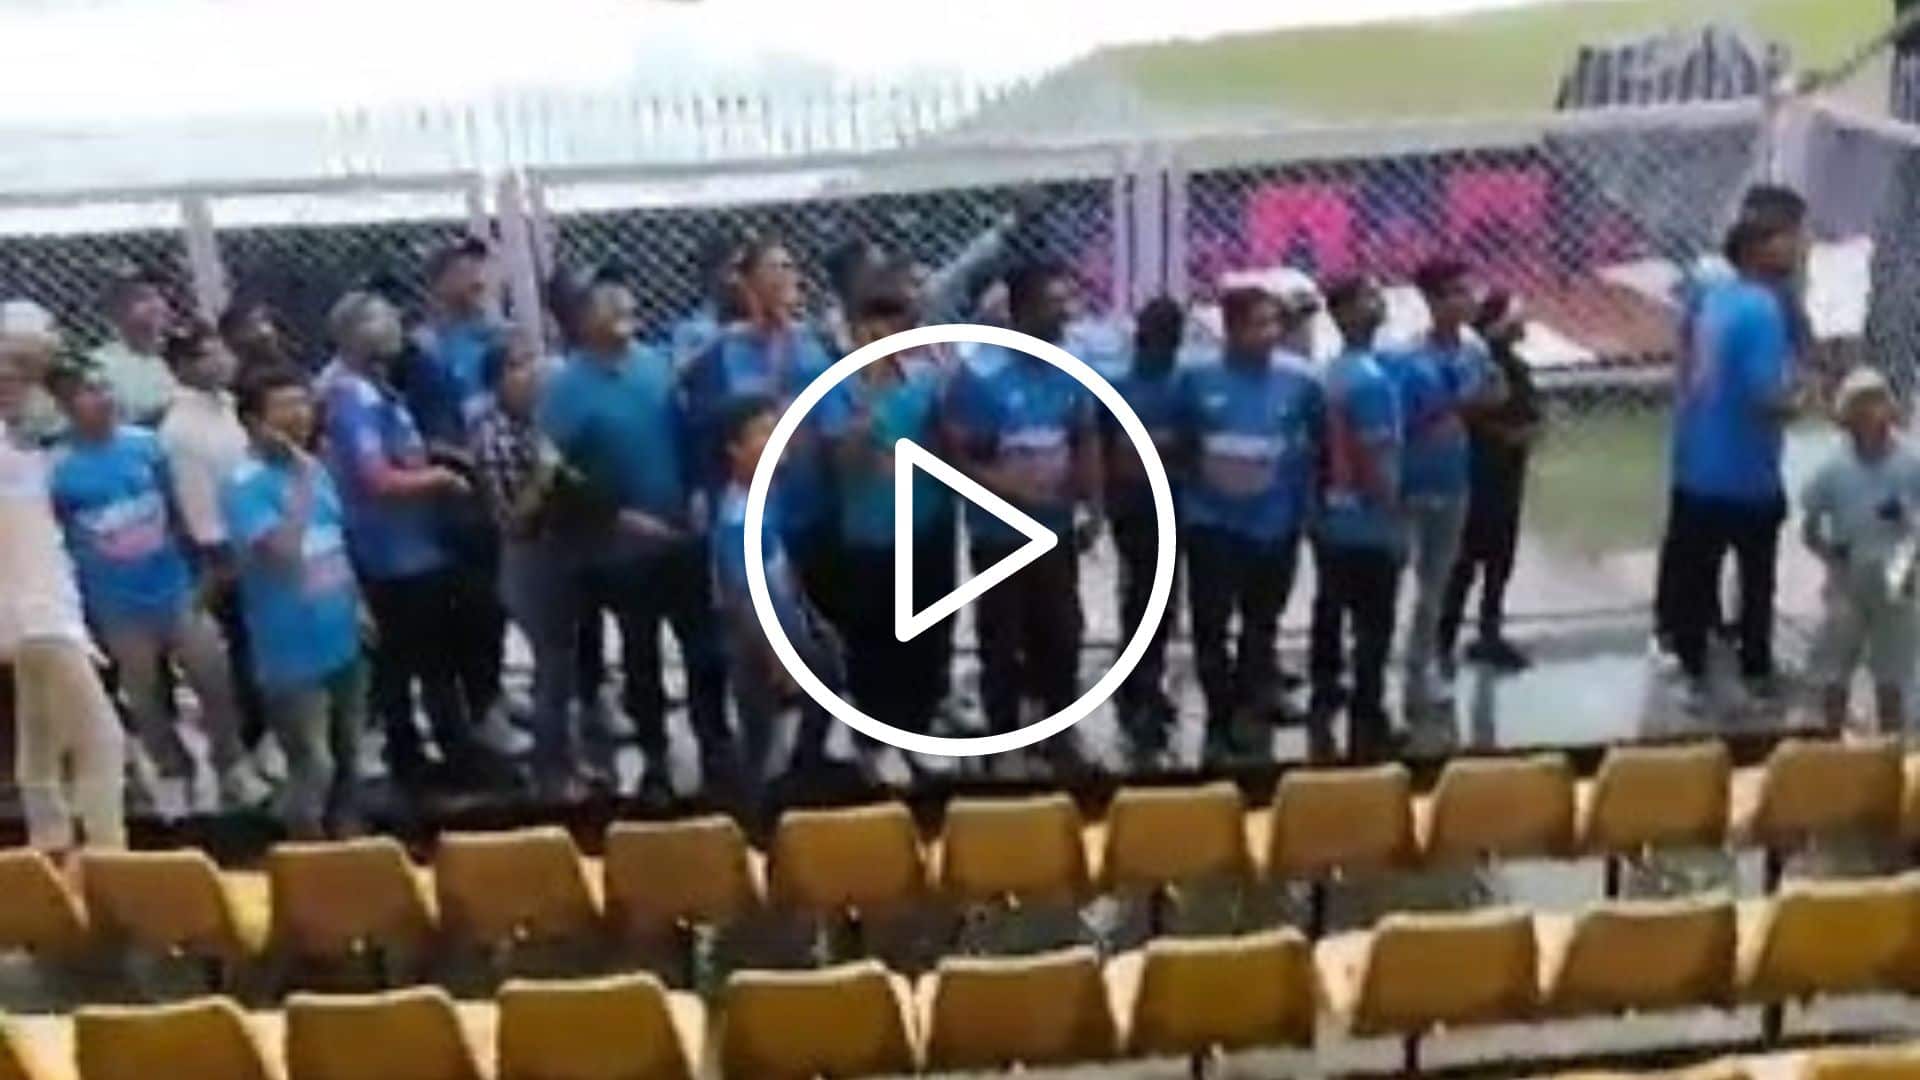 [Watch] Crowd Cheers Virat Kohli, Rohit Sharma In IND vs ENG World Cup Warm-Up